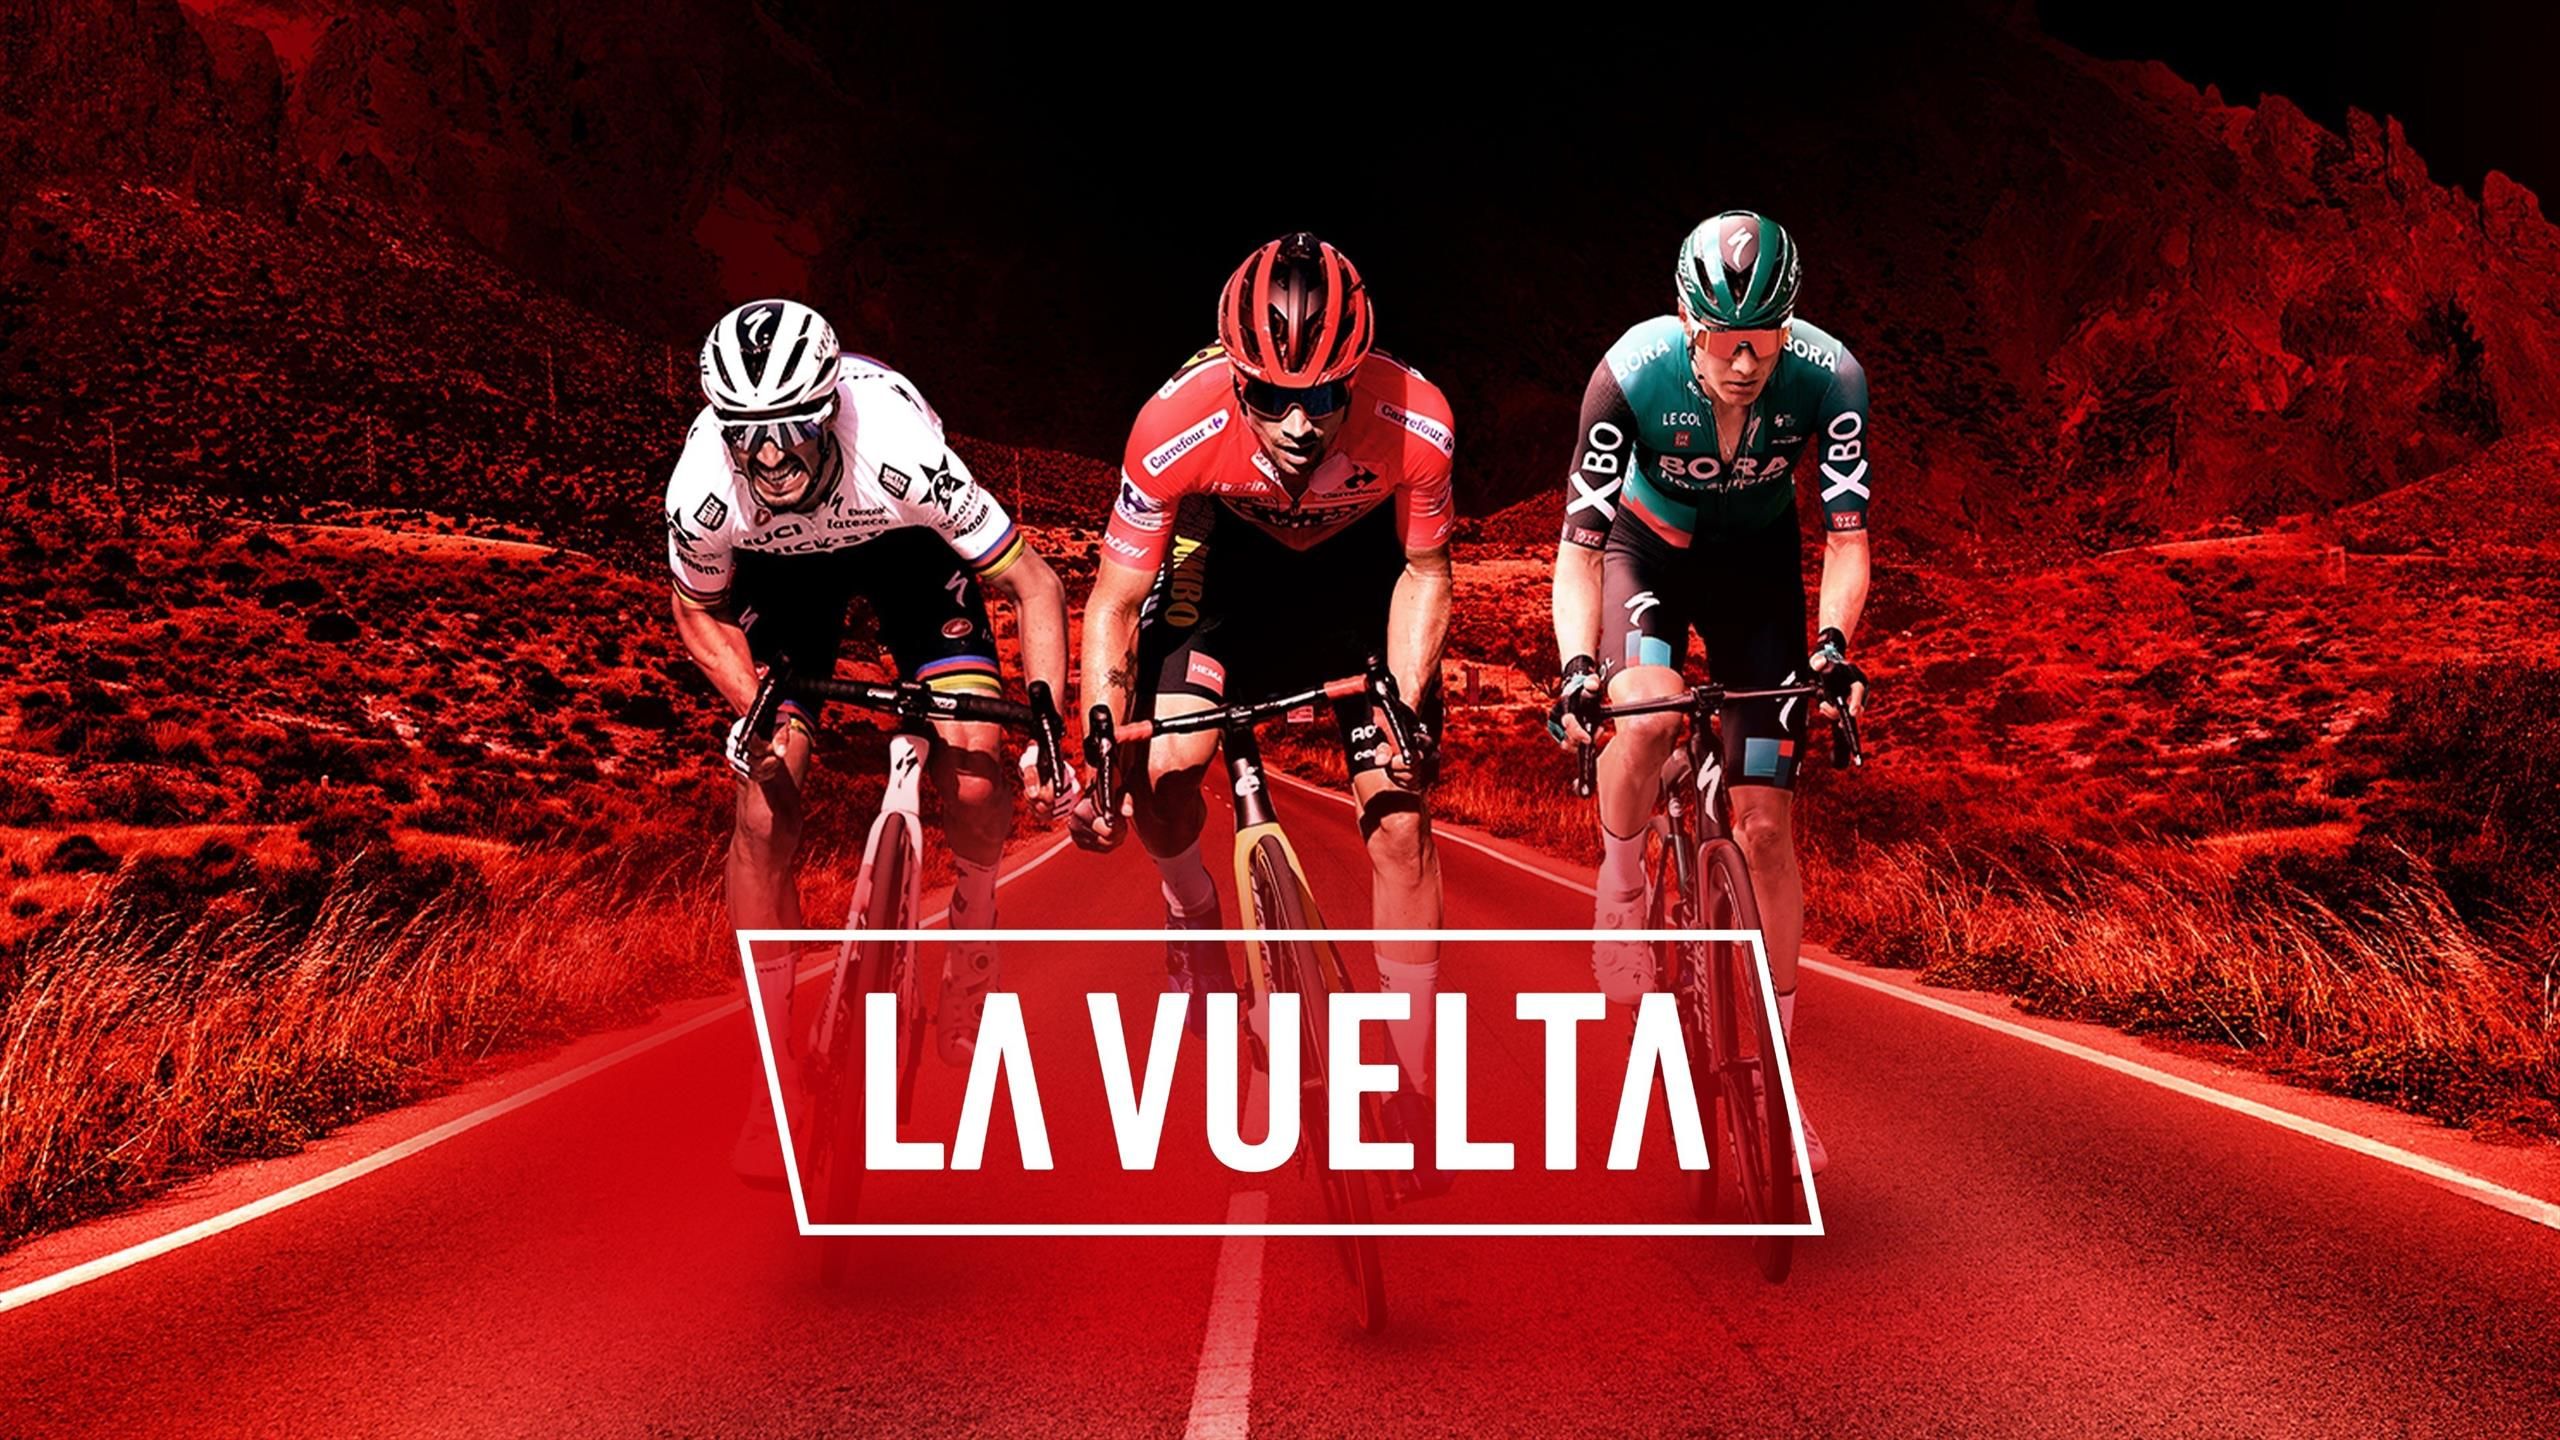 La Vuelta 2022 How to watch Spanish Grand Tour, TV and live stream